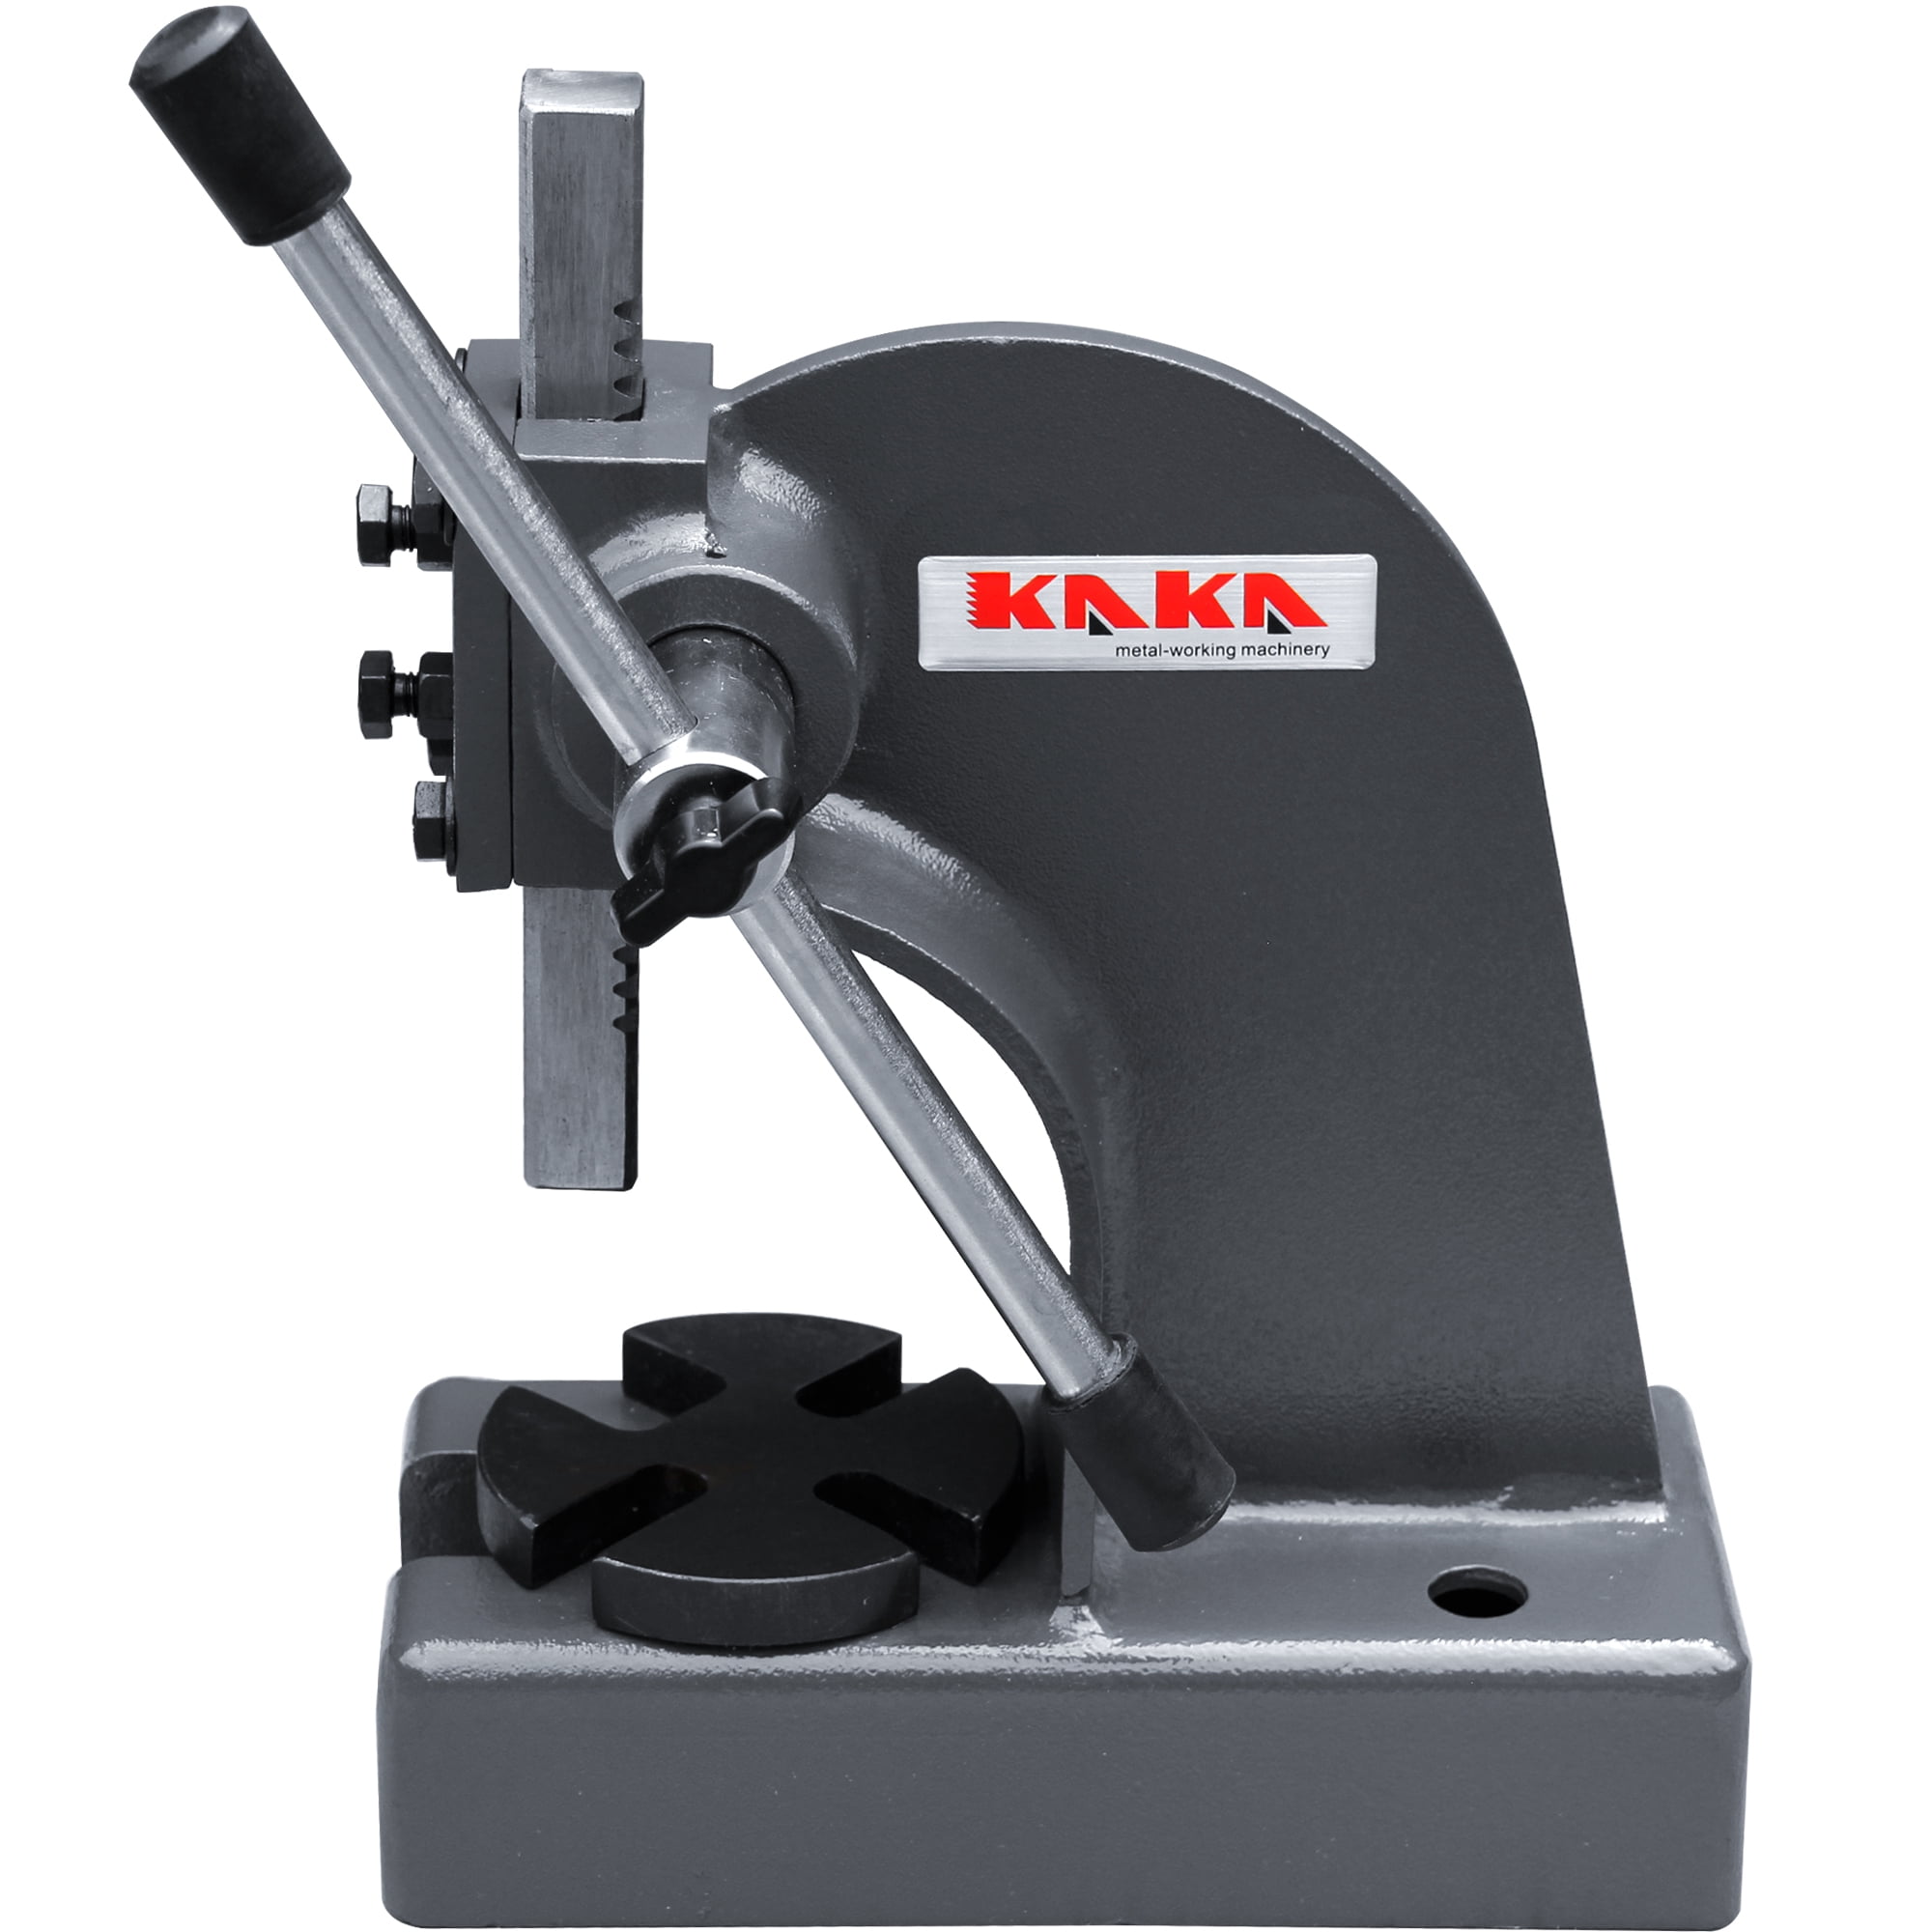 Kaka Industrial AP-2S Arbor Press, 2 Ton Hand Punching Machine, Adjust Press Height Jewelry Tools for DIY Leather Craft Punching Holes